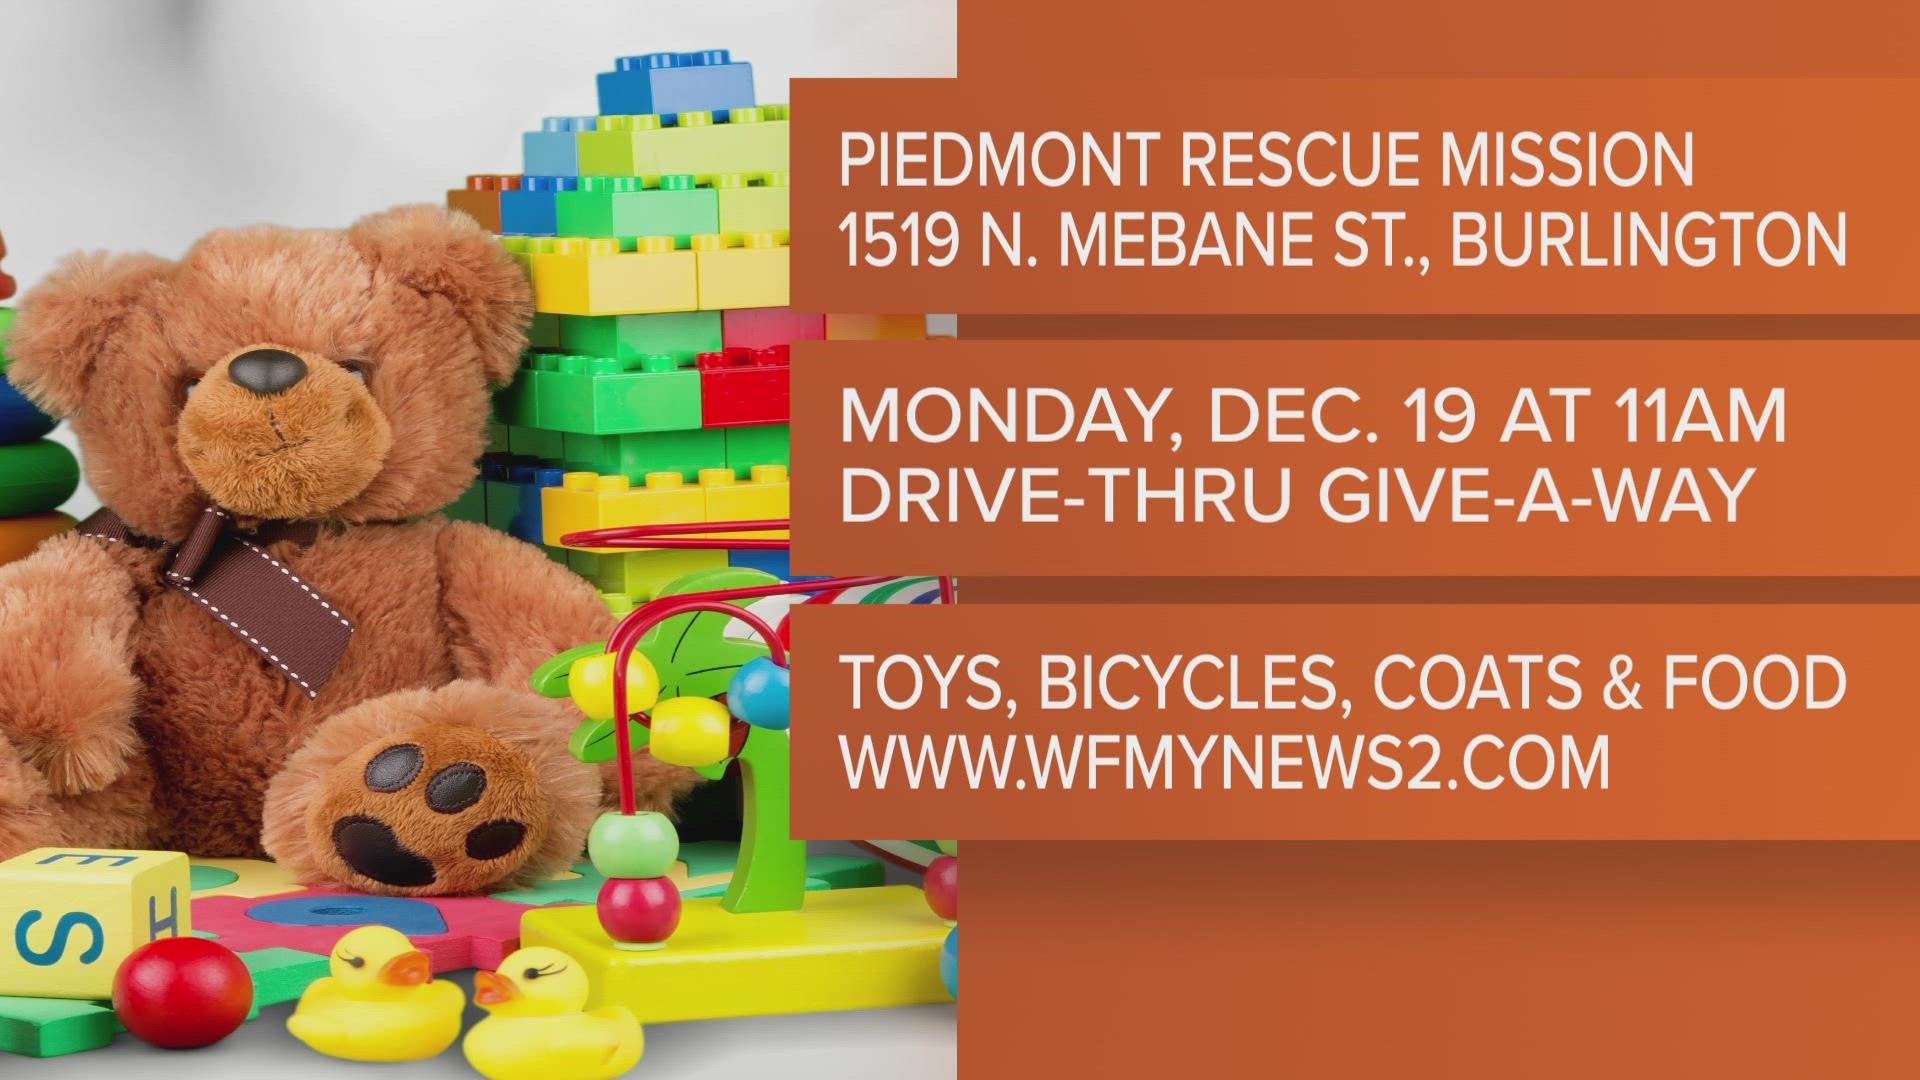 Piedmont Rescue Mission is spreading Christmas cheer to Triad children. The faith-based organization is giving away toys, bicycles, coats, and food, on Dec. 19.